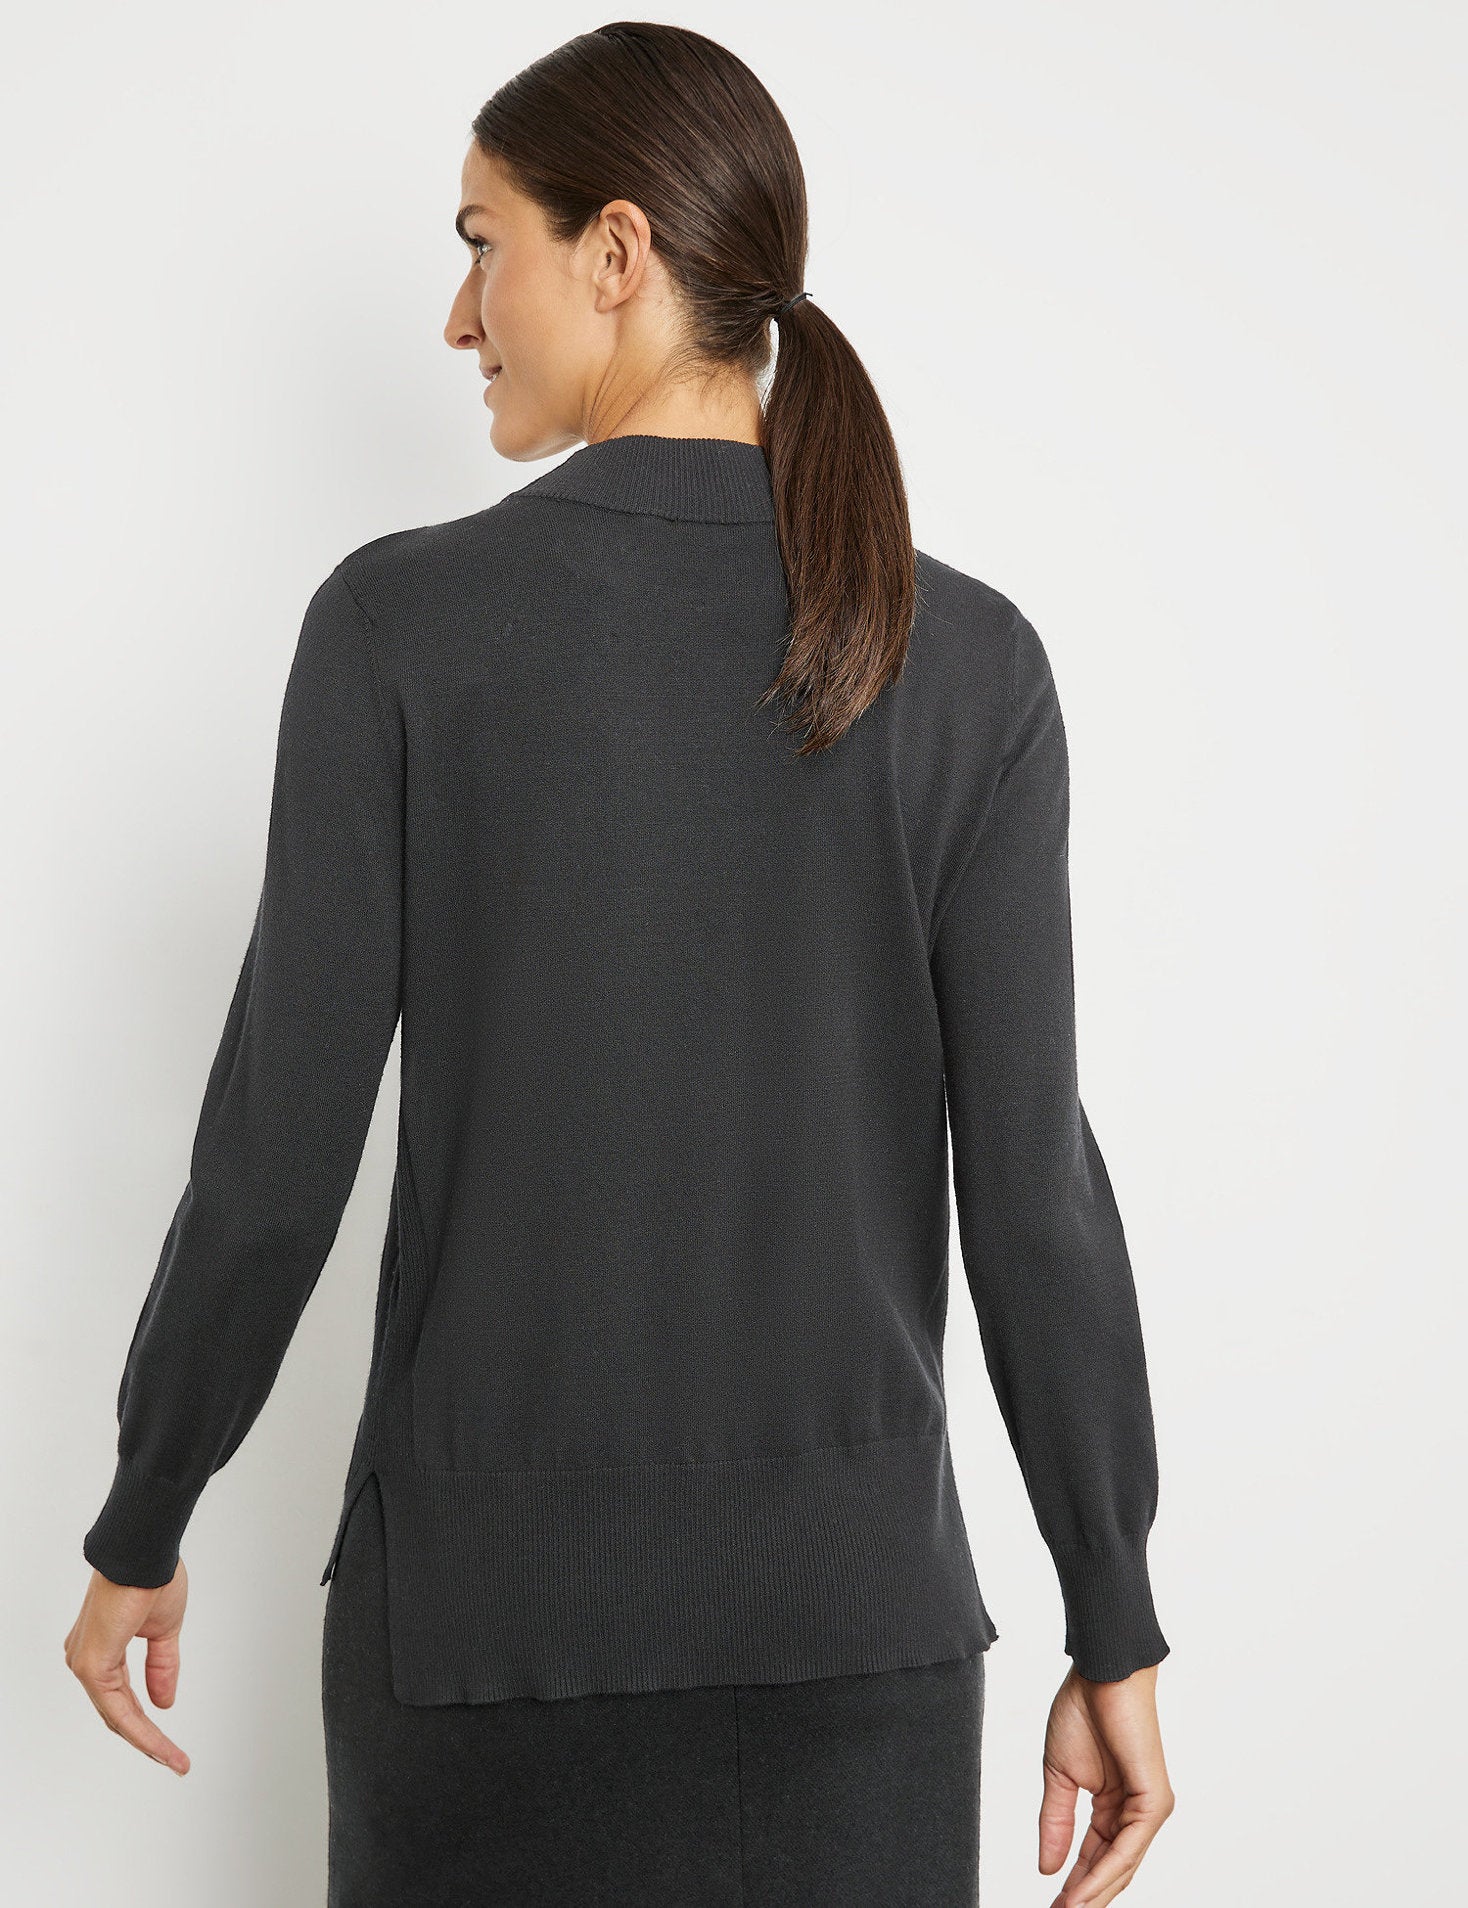 Jumper In A Knit Blend With An Elongated Back_170529-44723_11000_06